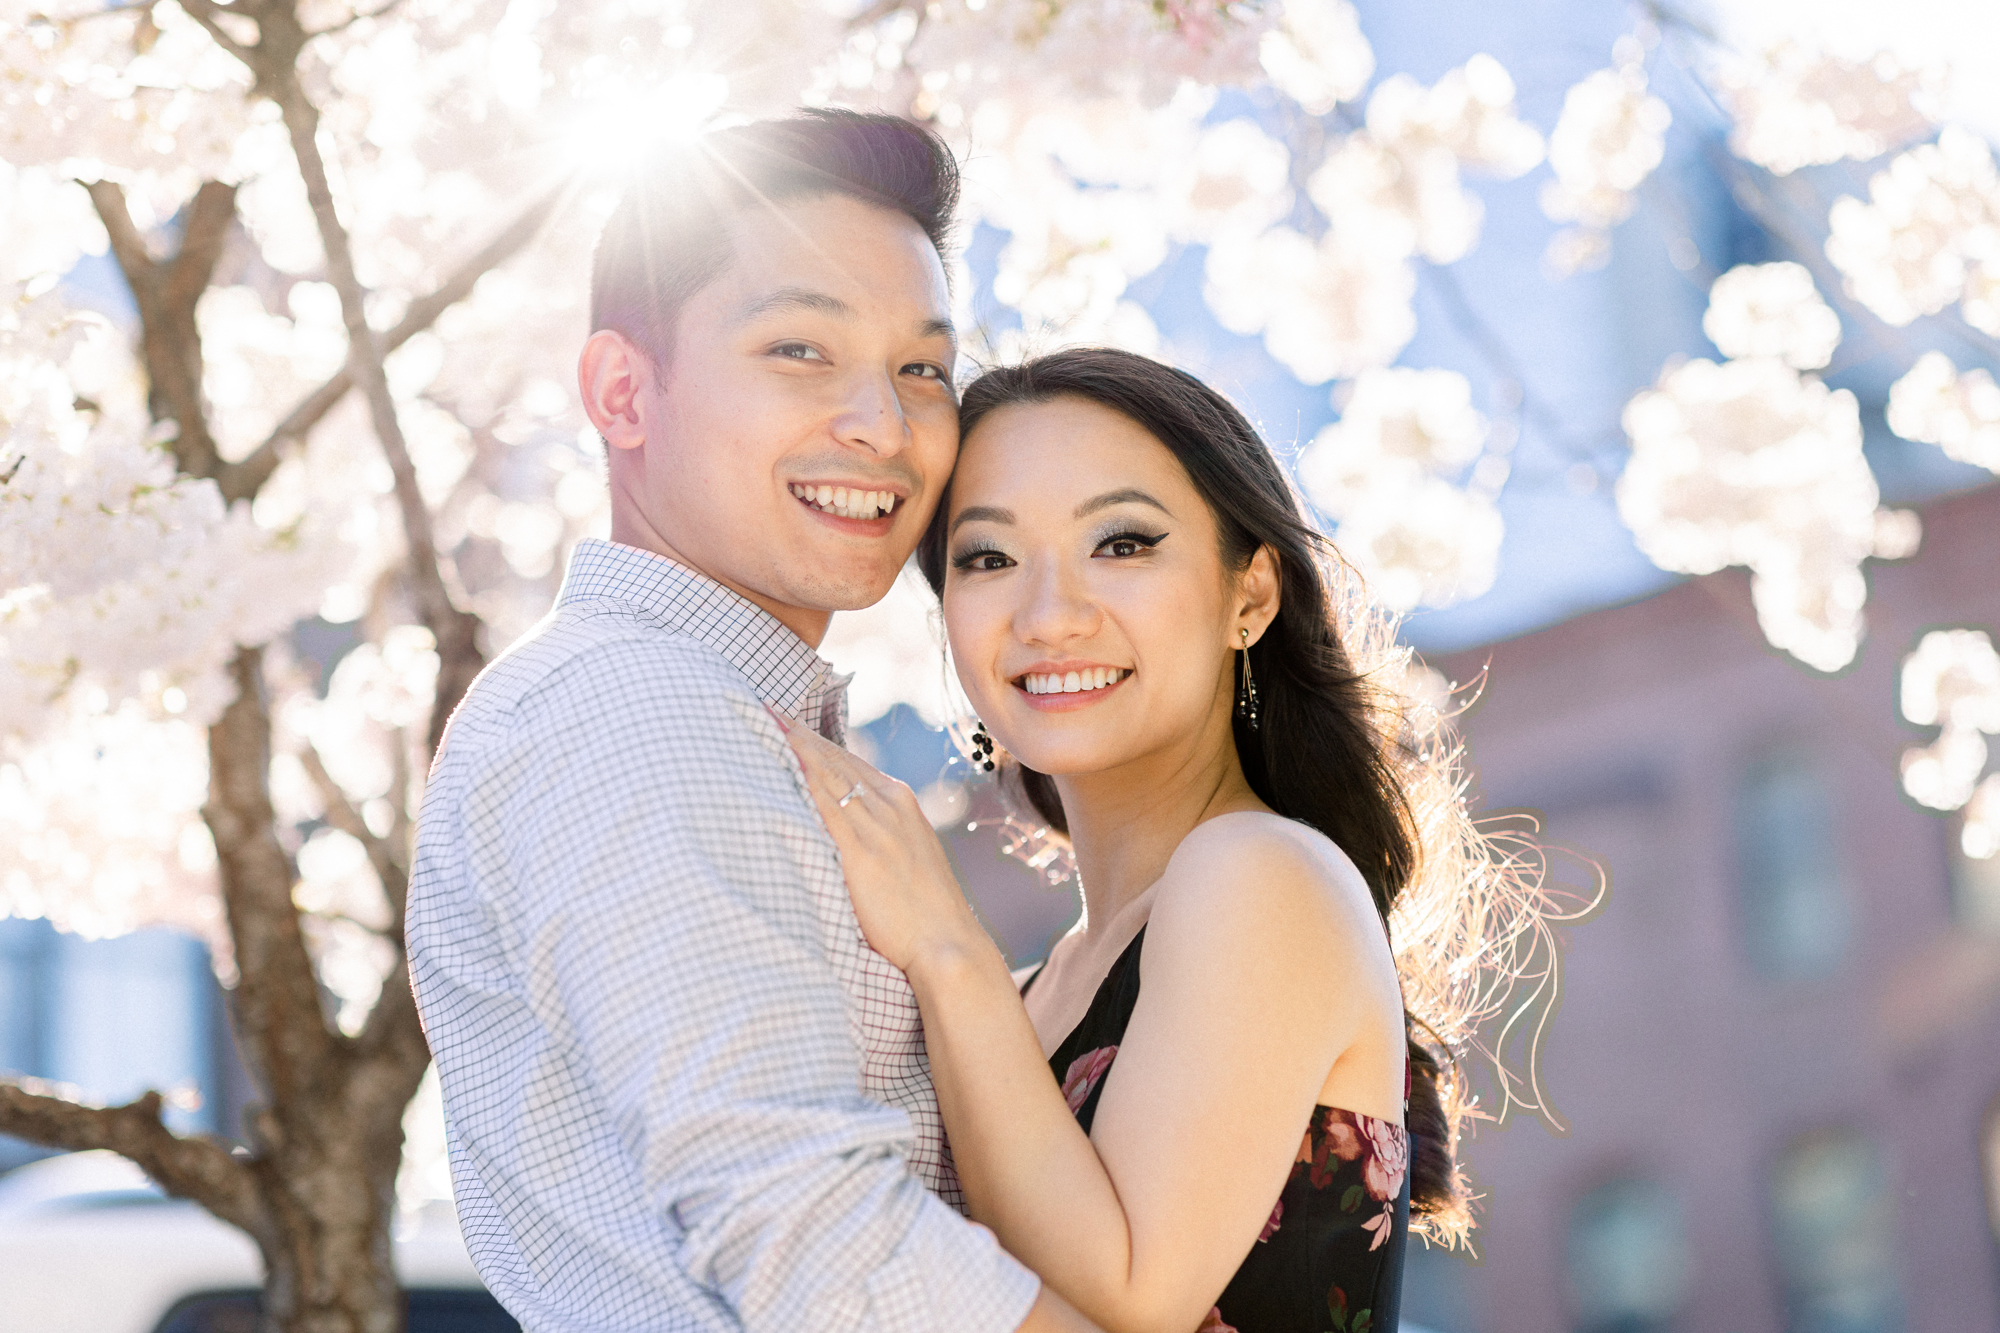 Glowing NYC Engagement Photography with Spring Blossoms